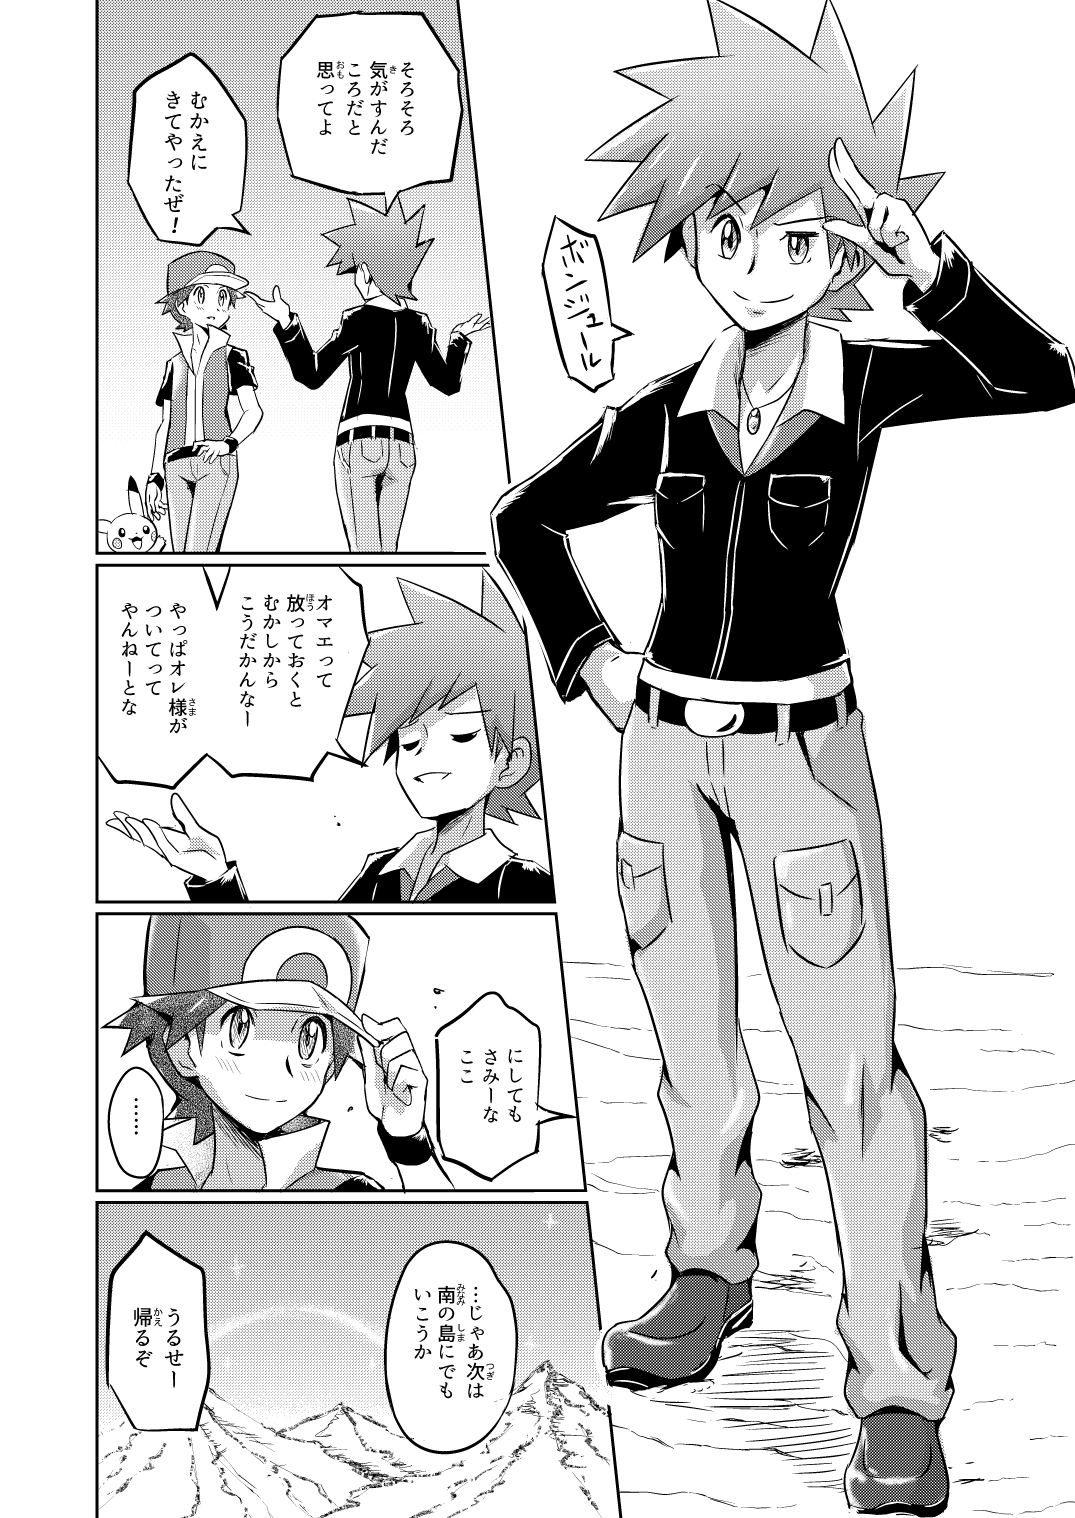 2boys baseball_cap cargo_pants comic greyscale hat hat_tip highres jacket jewelry long_sleeves male_focus monochrome mountain multiple_boys necklace ookido_green ookido_green_(hgss) pants pikachu pokemoa pokemon pokemon_(creature) pokemon_(game) pokemon_hgss rainbow red_(pokemon) red_(pokemon)_(remake) salute short_sleeves smile snow translation_request two-finger_salute